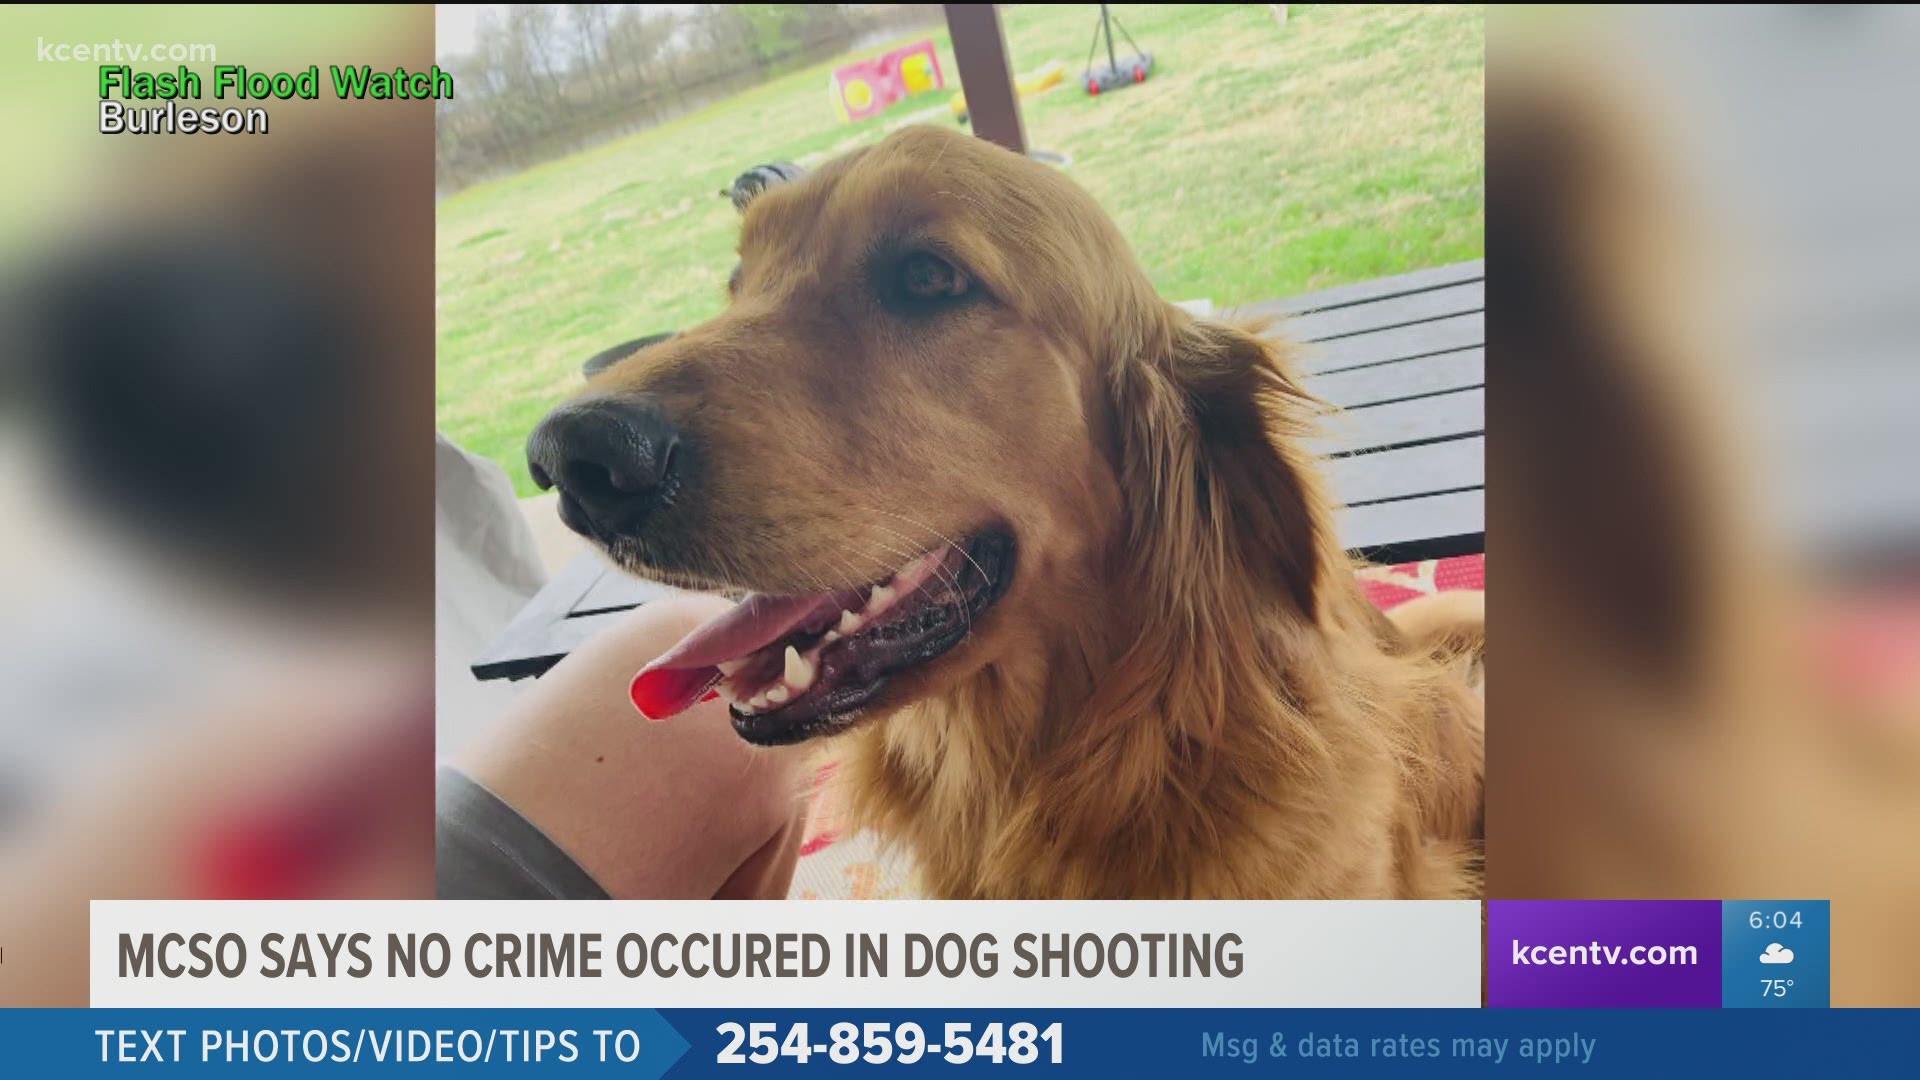 The sheriff's office said the dog was reportedly off the property and was attacking livestock before he was shot.